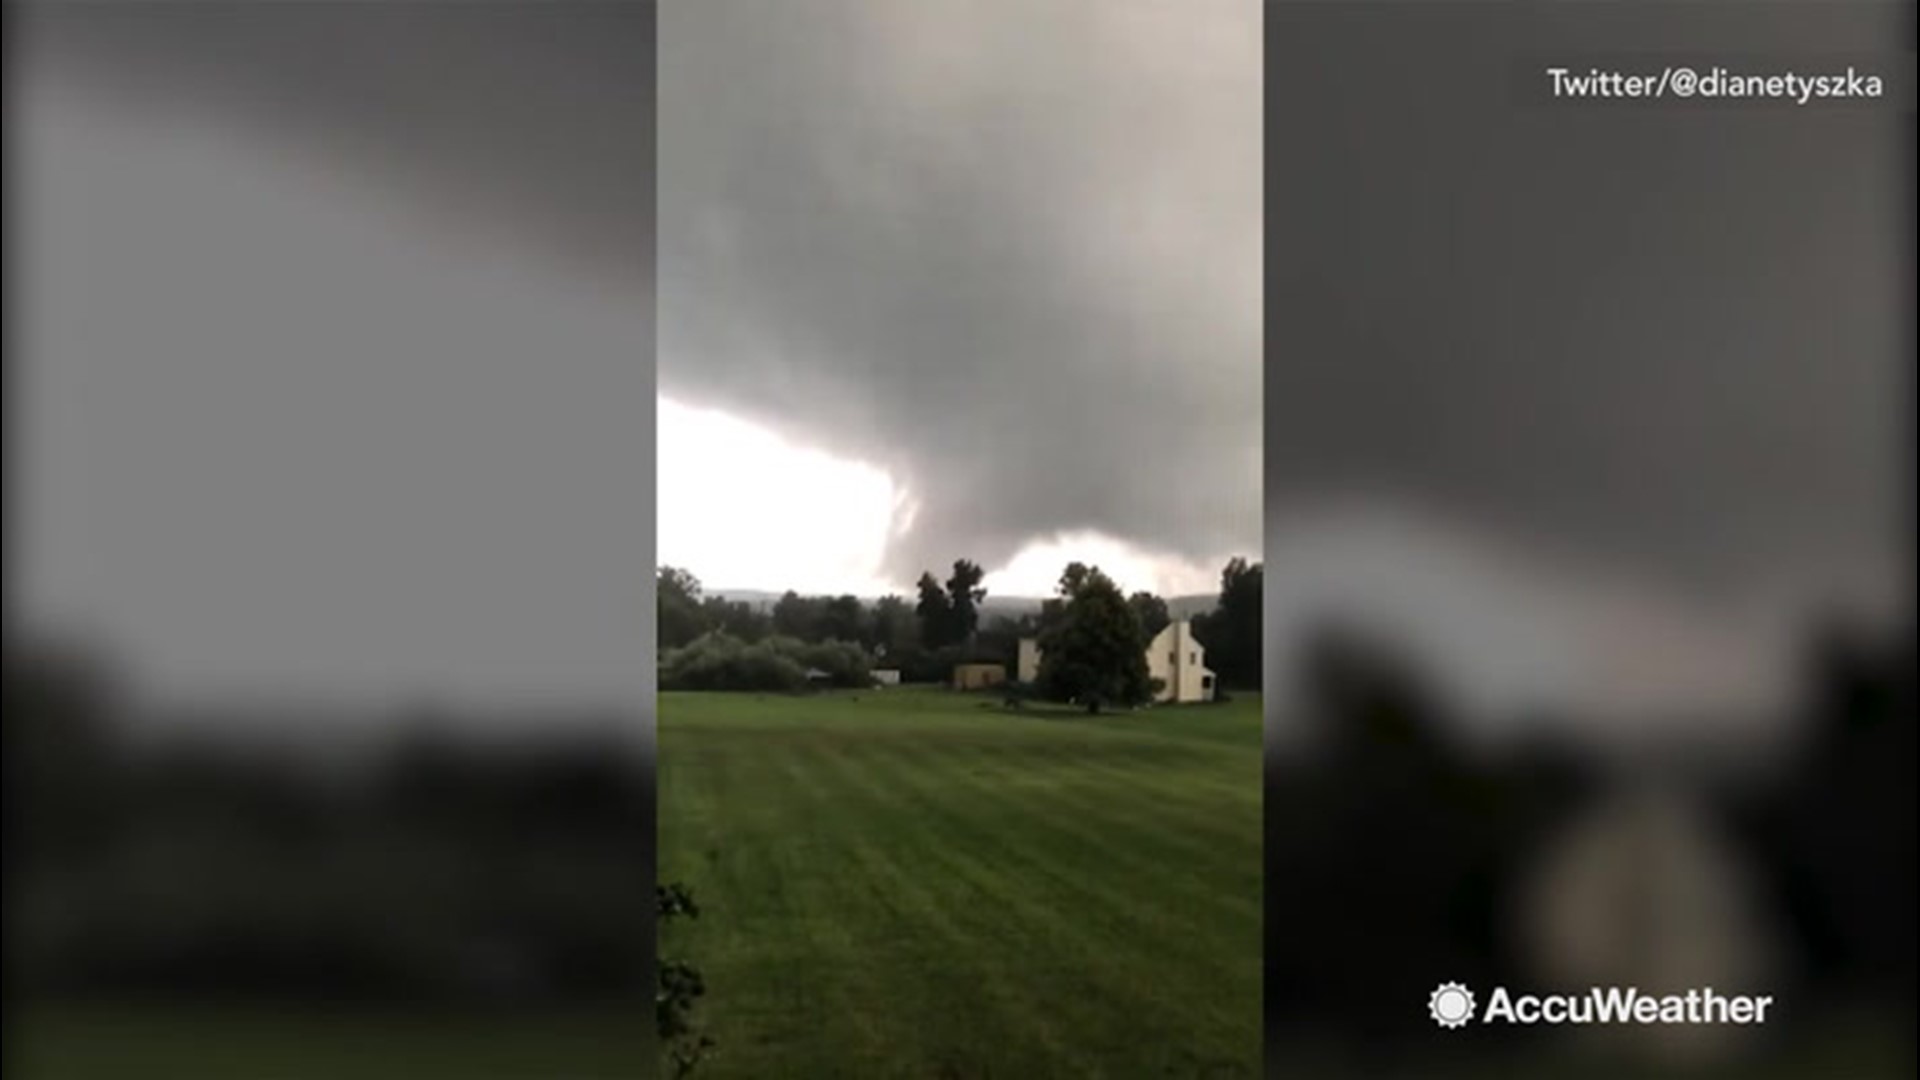 Watch as a possible tornado spun near Route 6 on Aug. 21. The funnel cloud was filmed from Coventry, Connecticut.